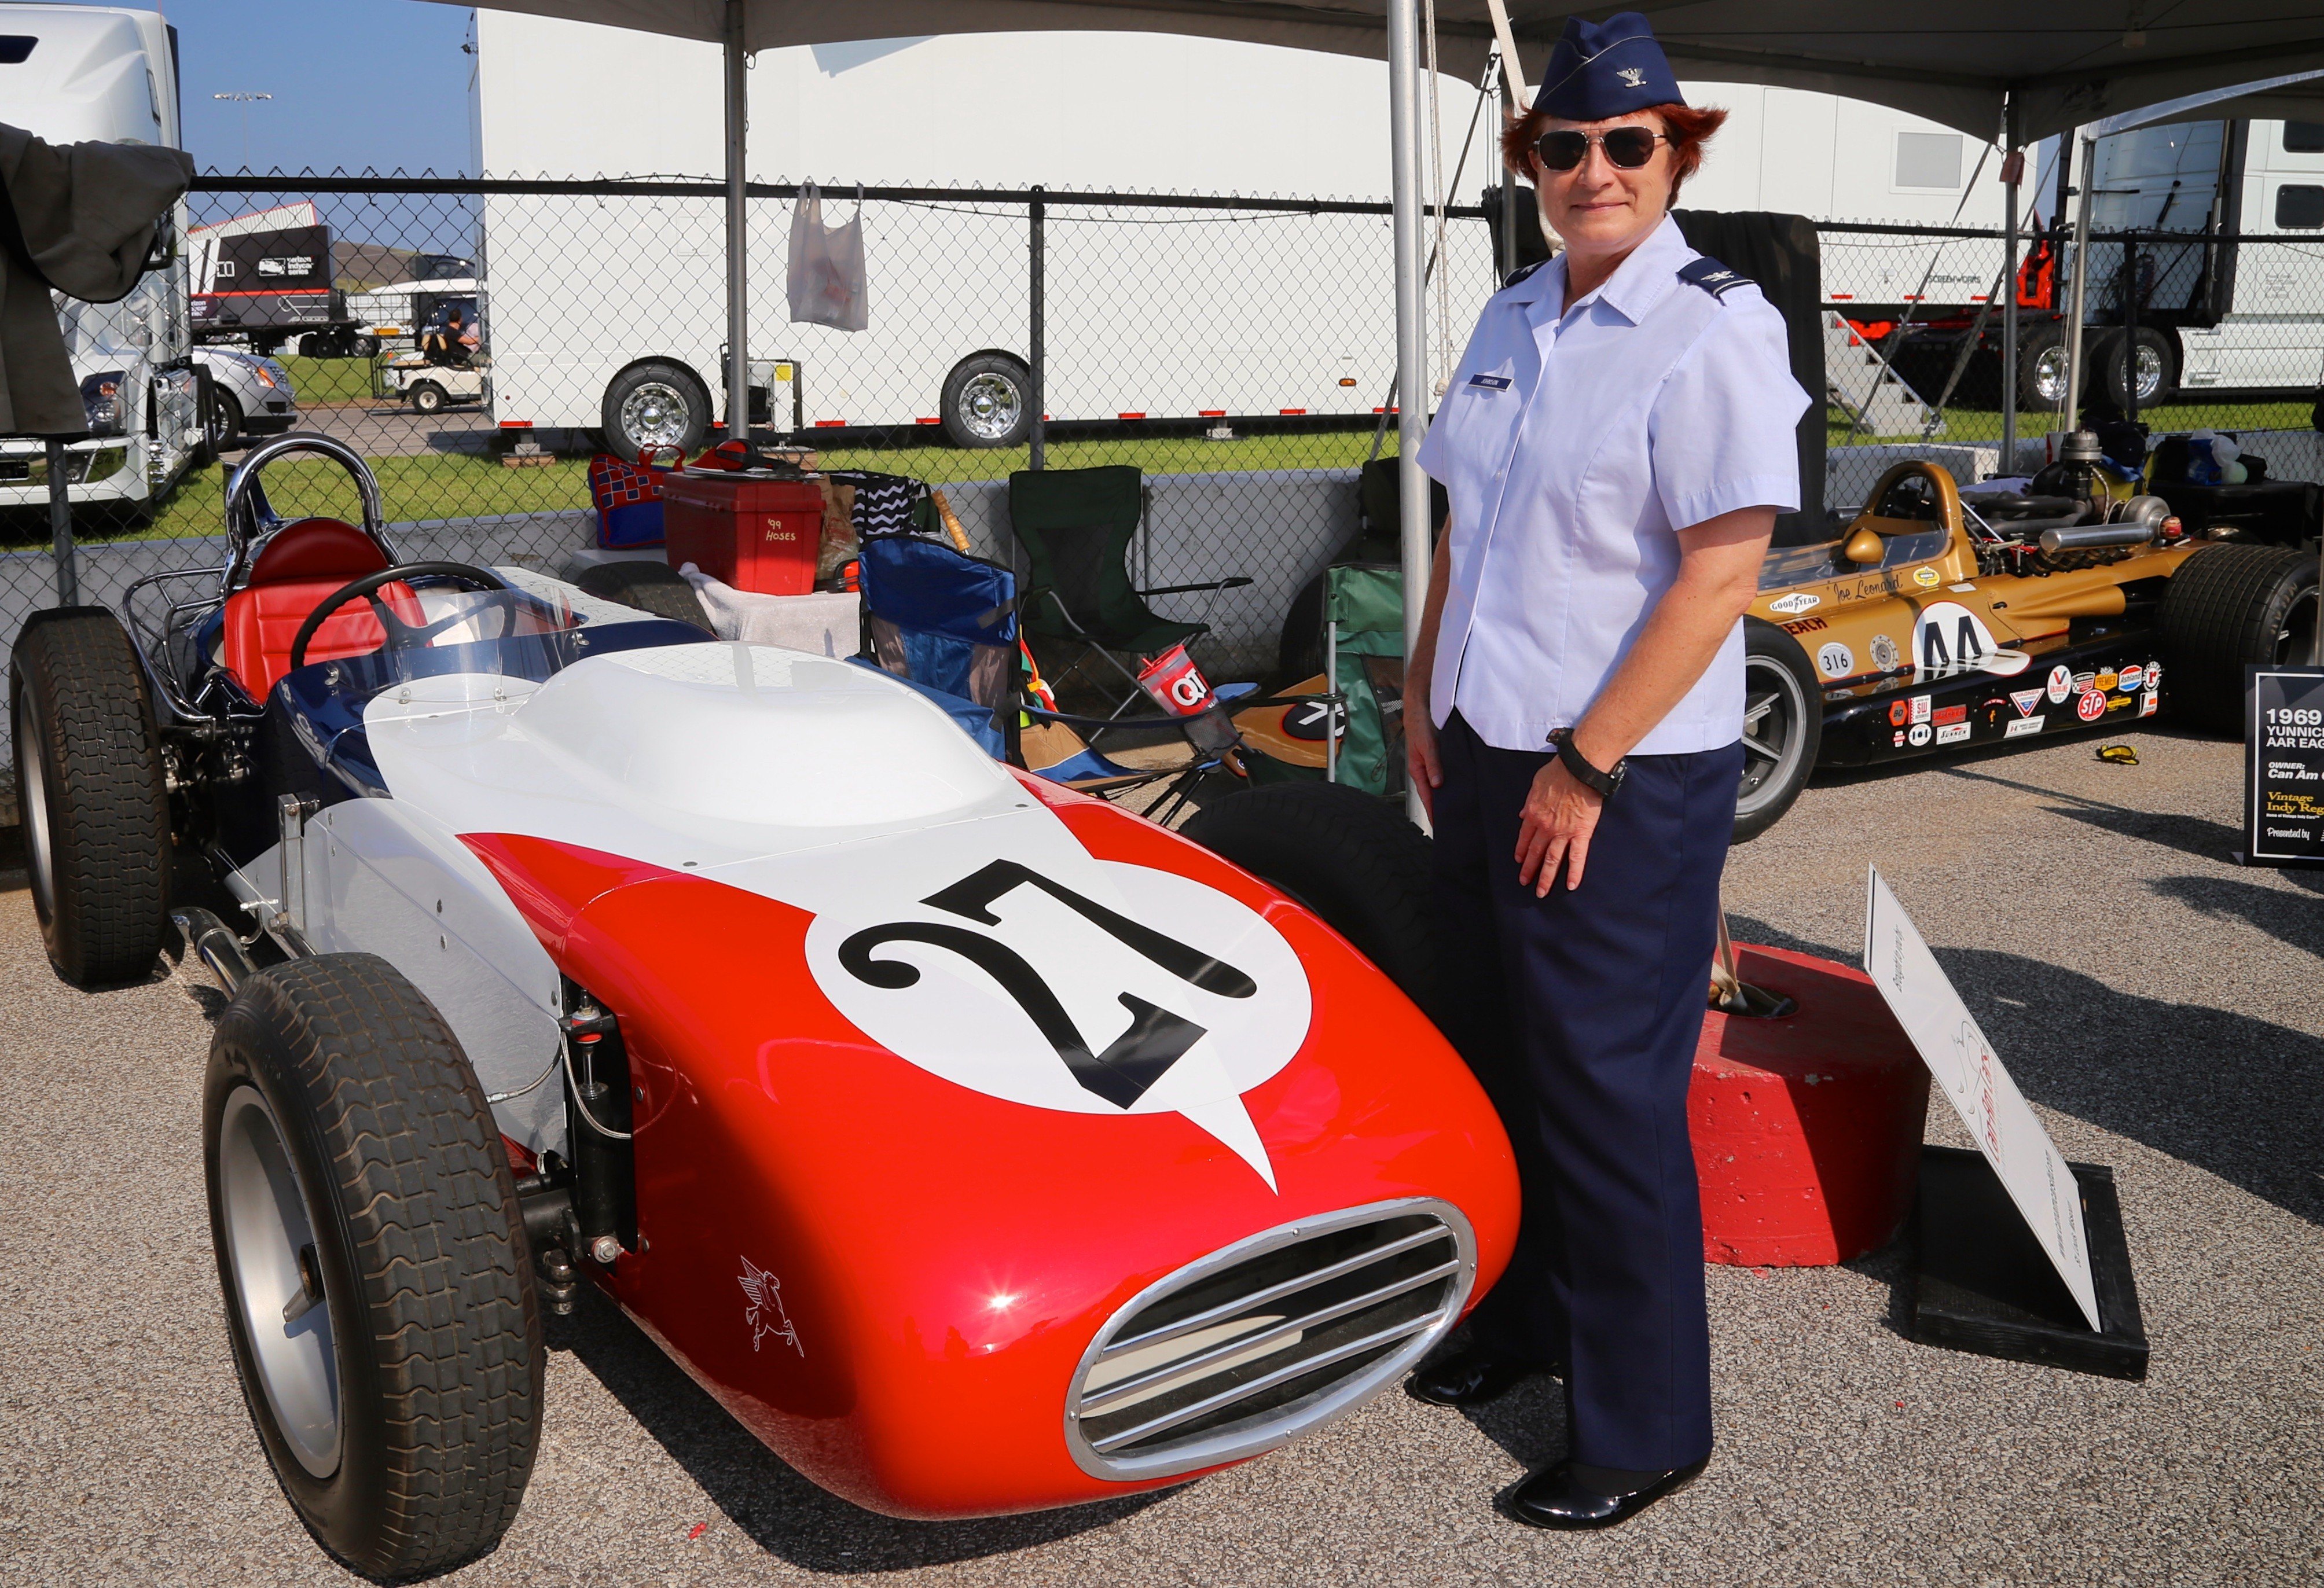 As part of a community outreach event, 932nd Airlift Wing Maintenance Group commander, Col. Sharon Johnson, got a backstage view amazing racing cars.  She was recognized on the big stage in front of the entire stadium with the Indy drivers at the Bommarito Automotive Group 500 Aug. 25, 2018, Gateway Motorsports Park, Madison, Illinois. Here she was shown the "pit row" vintage racers before attending a driver's meeting.  Johnson was an honored VIP to help kick off the 2nd annual IndyCar race which was won by Will Power,  won the 248-lap race around the four-turn, 1.25-mile Gateway Motorsports Park oval paved track in Madison, Illinois, in his #12 Chevrolet by 1.3117 seconds over second place finisher Alexander Rossi.  The 932nd Airlift Wing was represented by maintenance, medical, public affairs staff and operations personnel.  (U.S. Air Force photo by Lt. Col. Stan Paregien